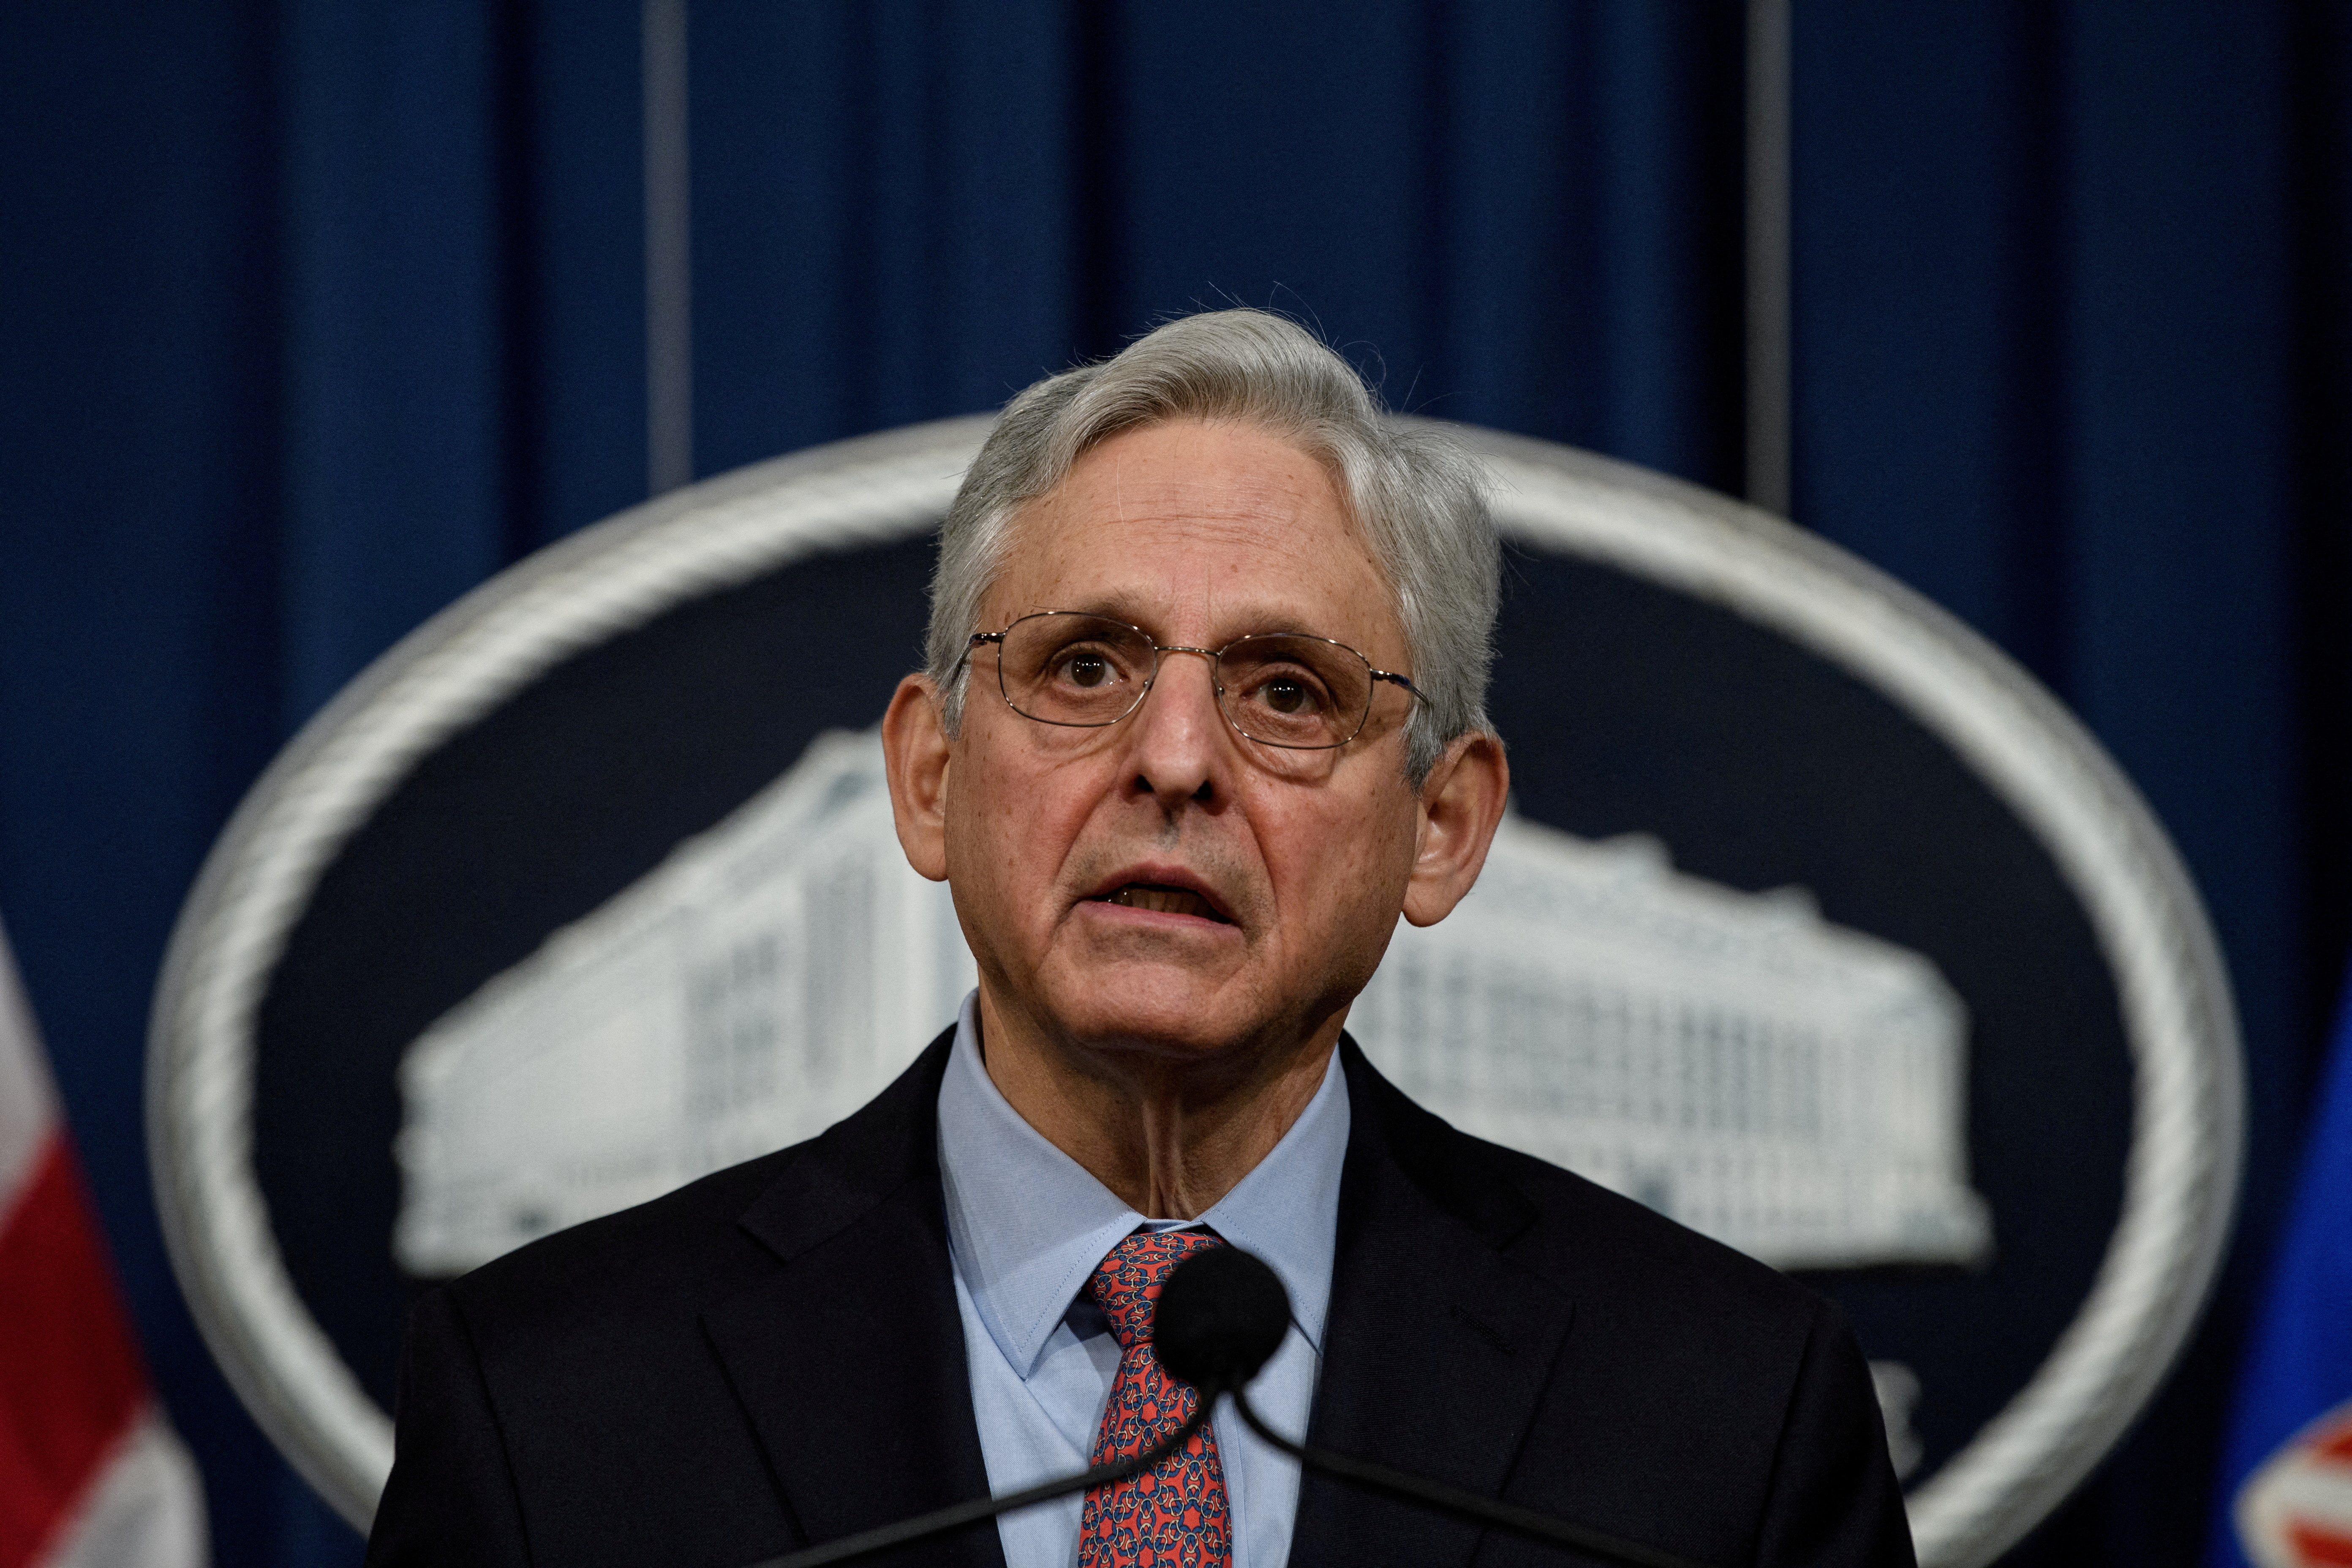 U.S. Attorney General Merrick Garland speaks to the press at the Justice Department, in Washington